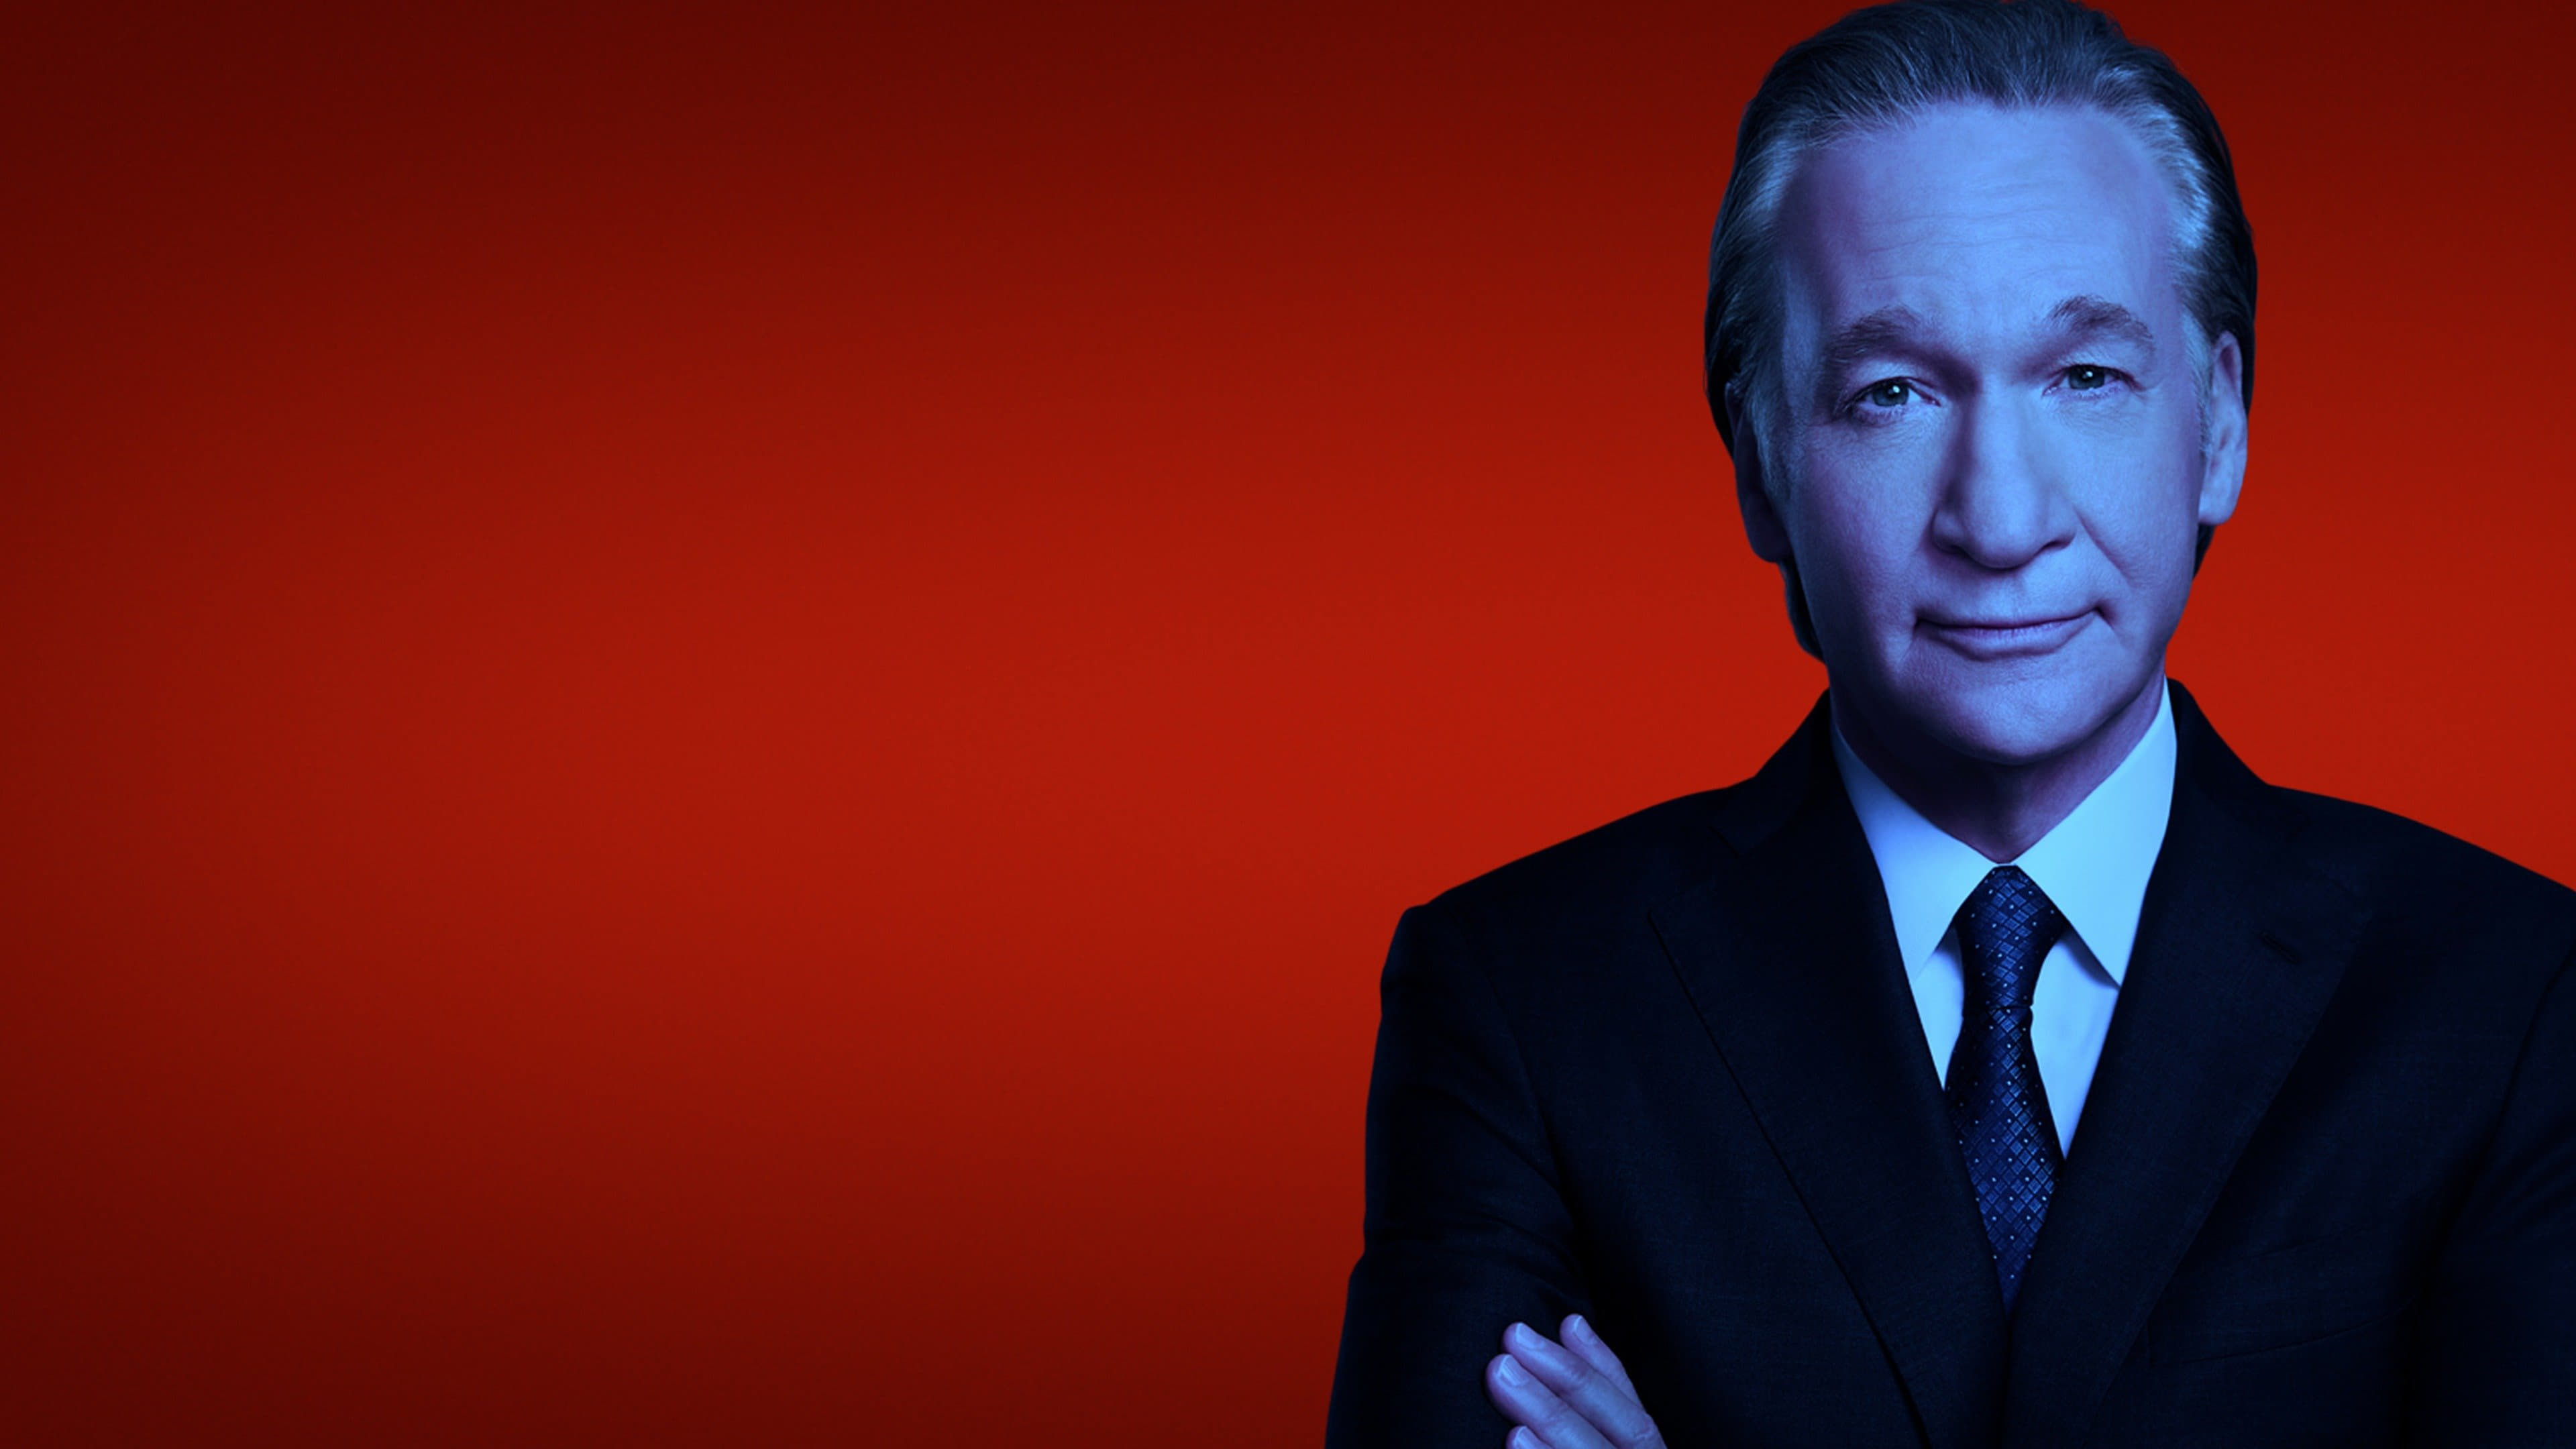 Real Time with Bill Maher - Season 22 Episode 7